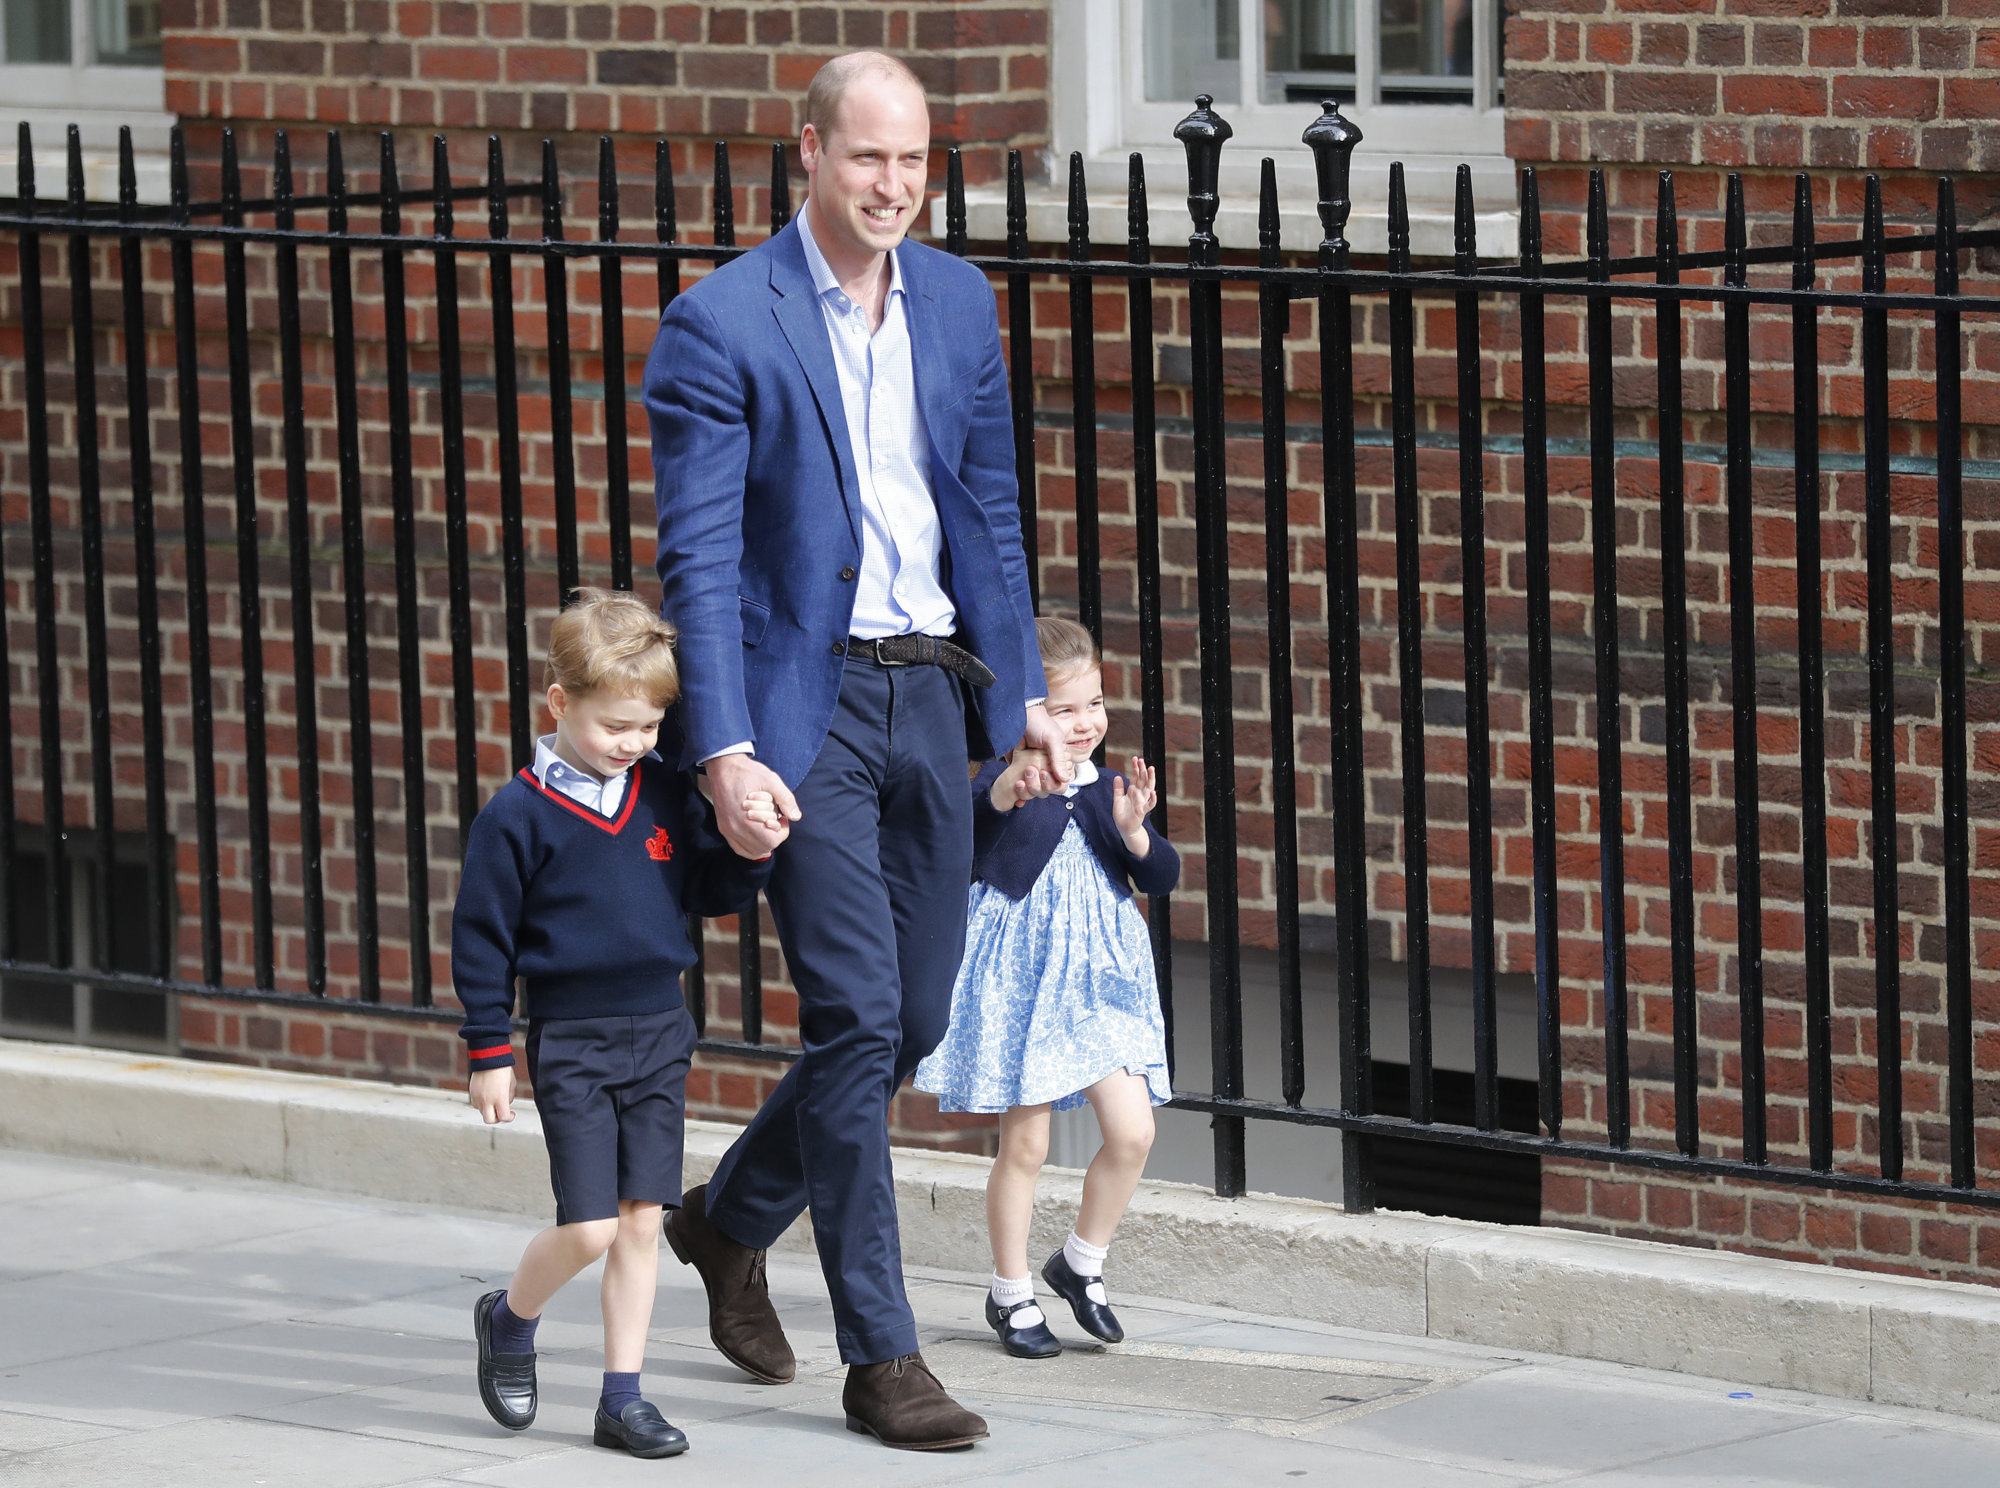 Britain's Prince William arrives with Prince George and Princess Charlotte back to the Lindo wing at St Mary's Hospital in London London, Monday, April 23, 2018. The Duchess of Cambridge gave birth Monday to a healthy baby boy — a third child for Kate and Prince William and fifth in line to the British throne. (AP Photo/Frank Augstein)